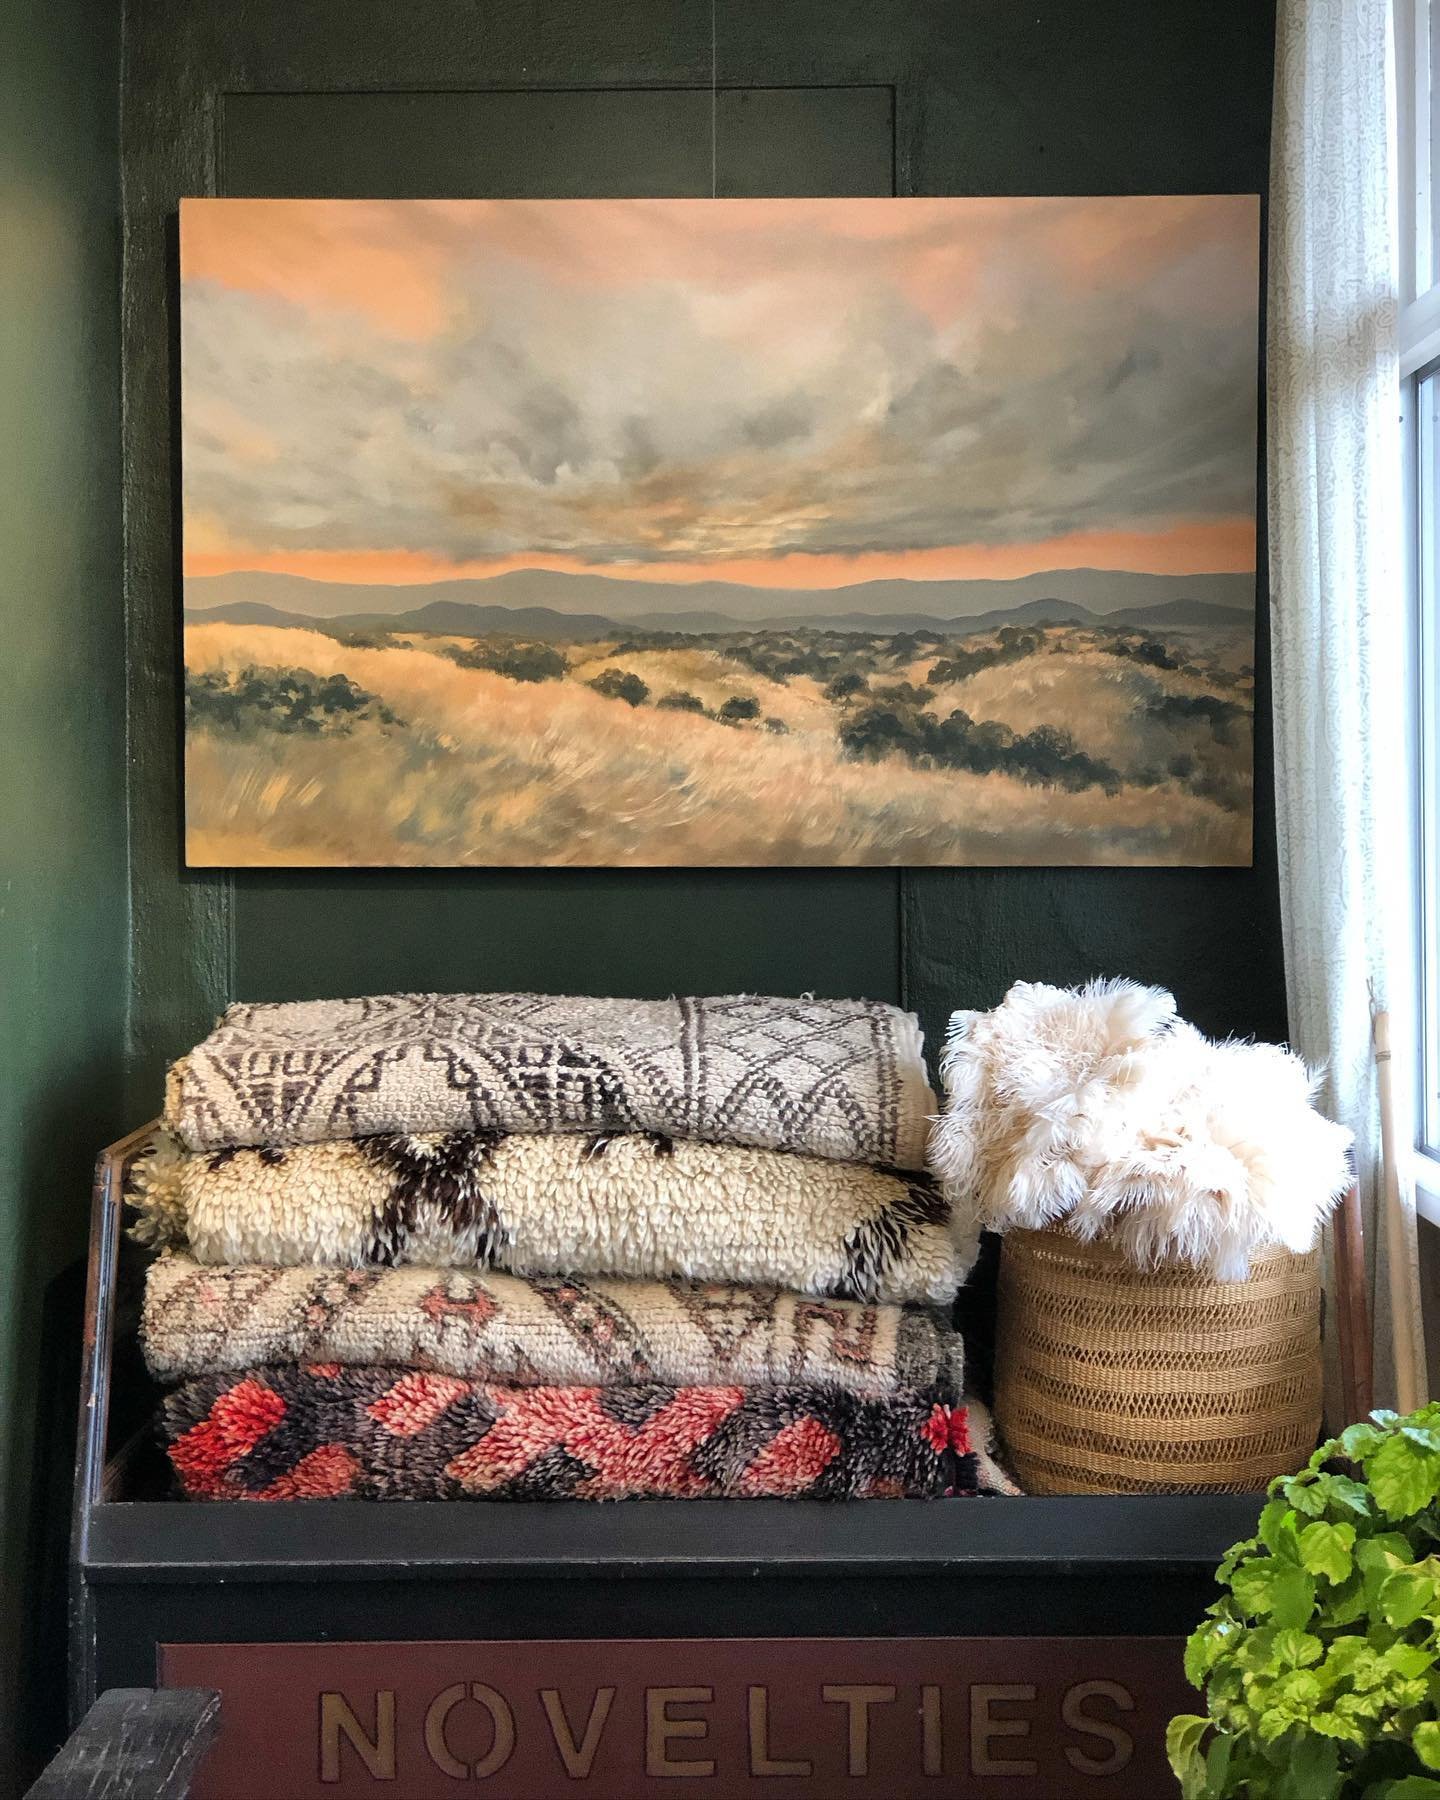 Let&rsquo;s Escape by @hilarybrock. Just one of her beautiful pieces in the store. Come by and check out the rest!

@shopwendyfoster